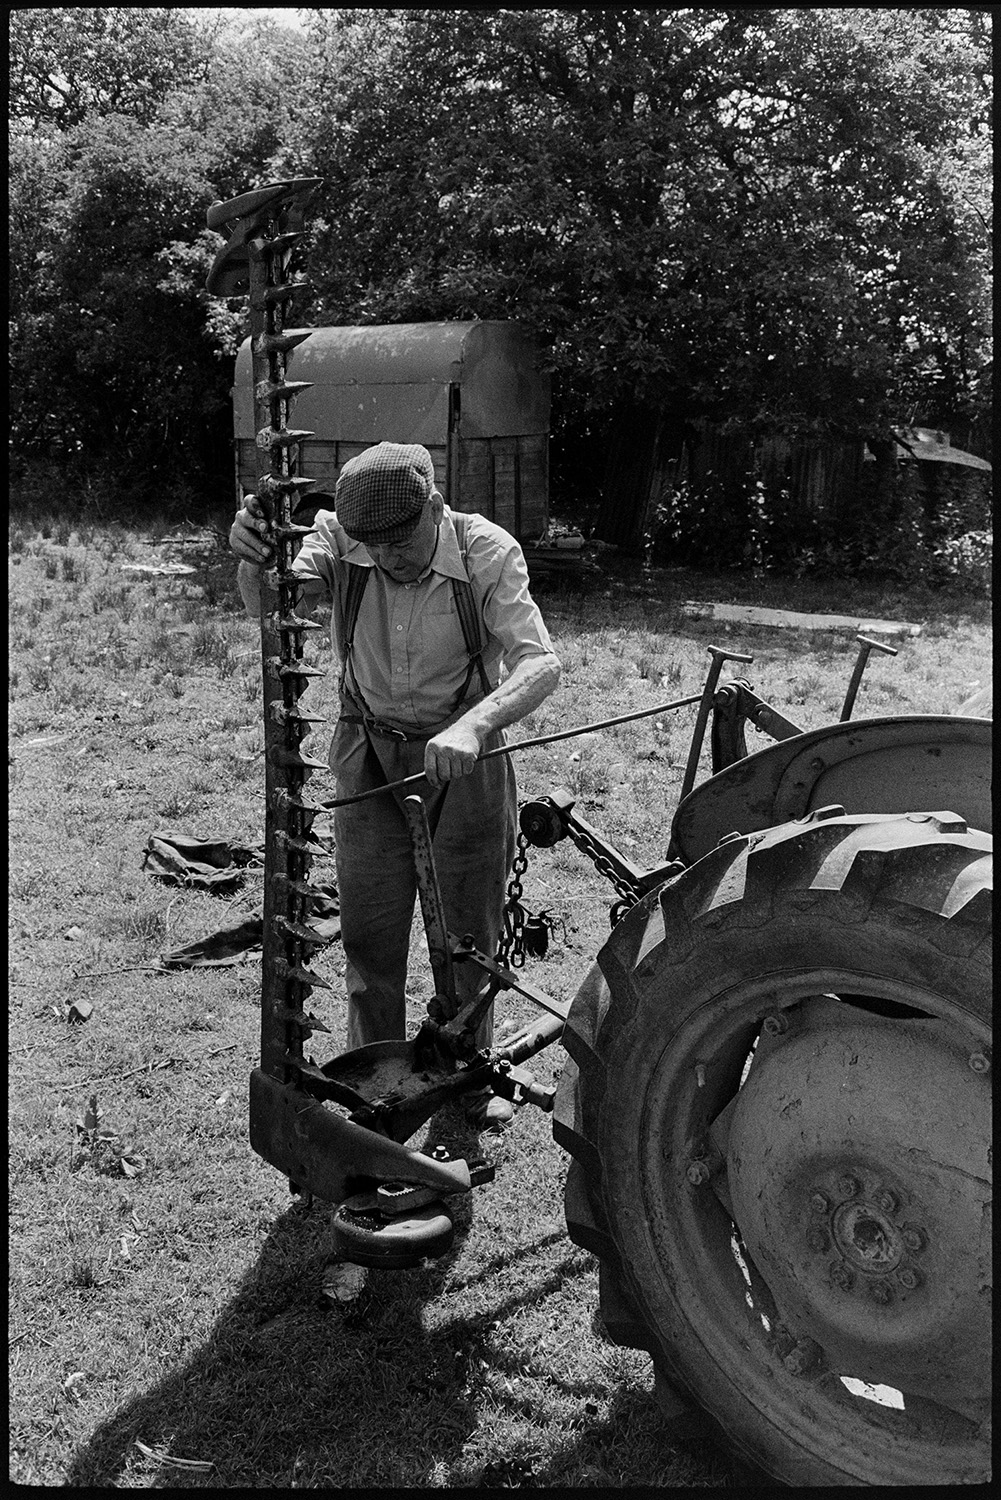 Farmer shearing sheep under tree. Woman farmer bundling up fleeces.
[Cyril Bennett folding up a grass cutting machine attached to a tractor in a field at Cuppers Piece, Beaford. A trailer under a hedge is visible in the background.]